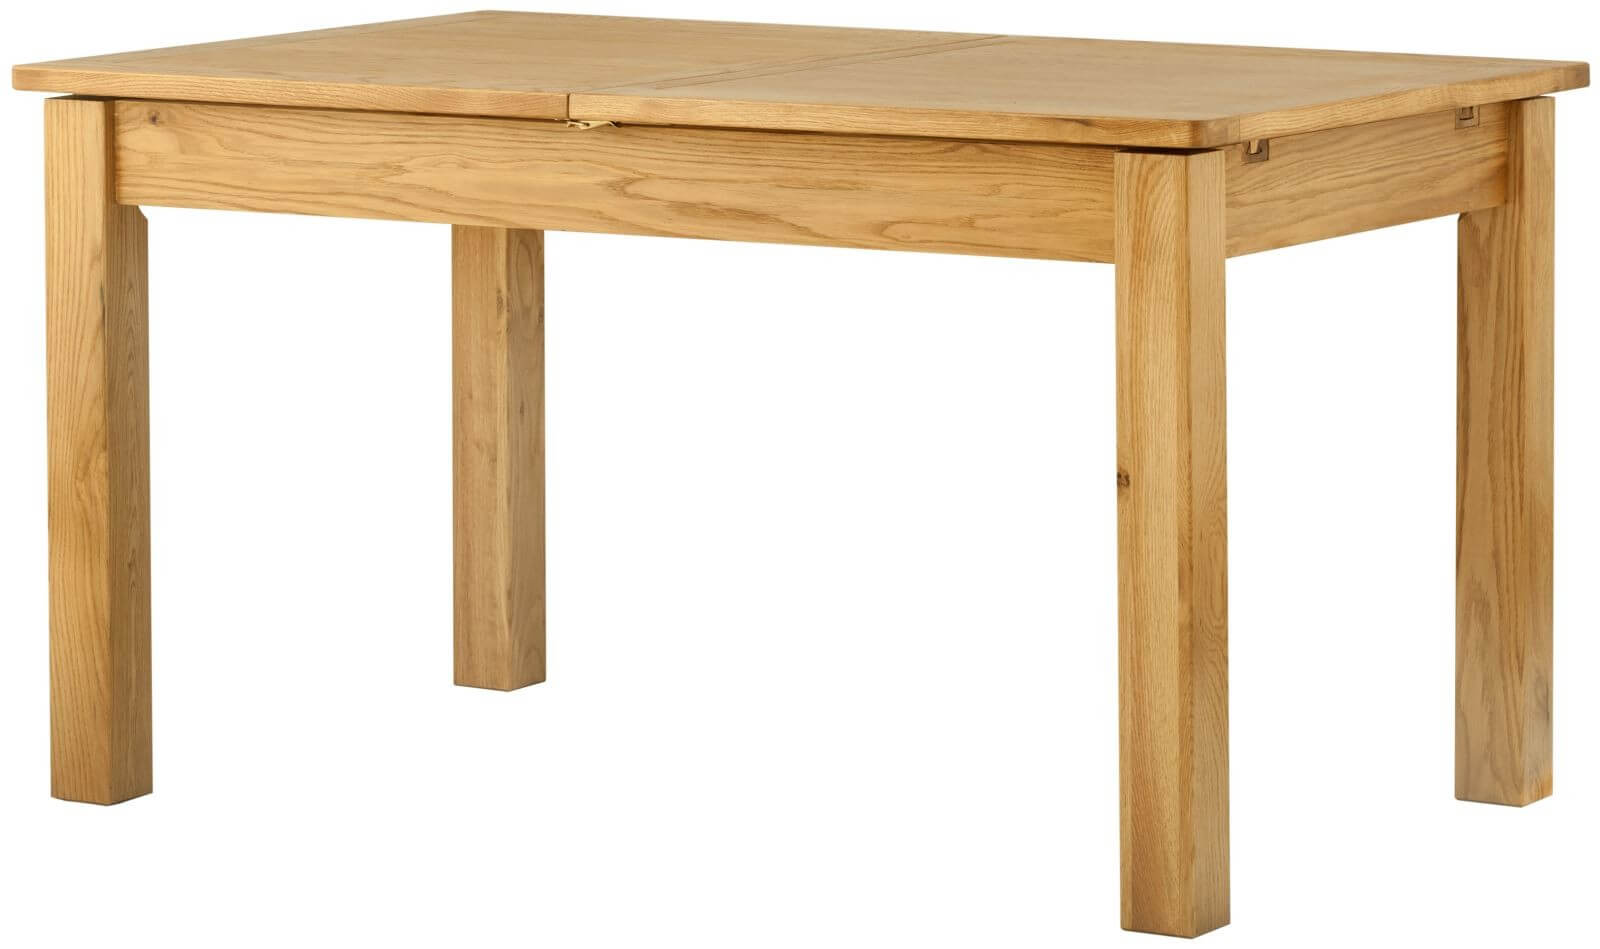 Showing image for Seattle extending dining table - oak